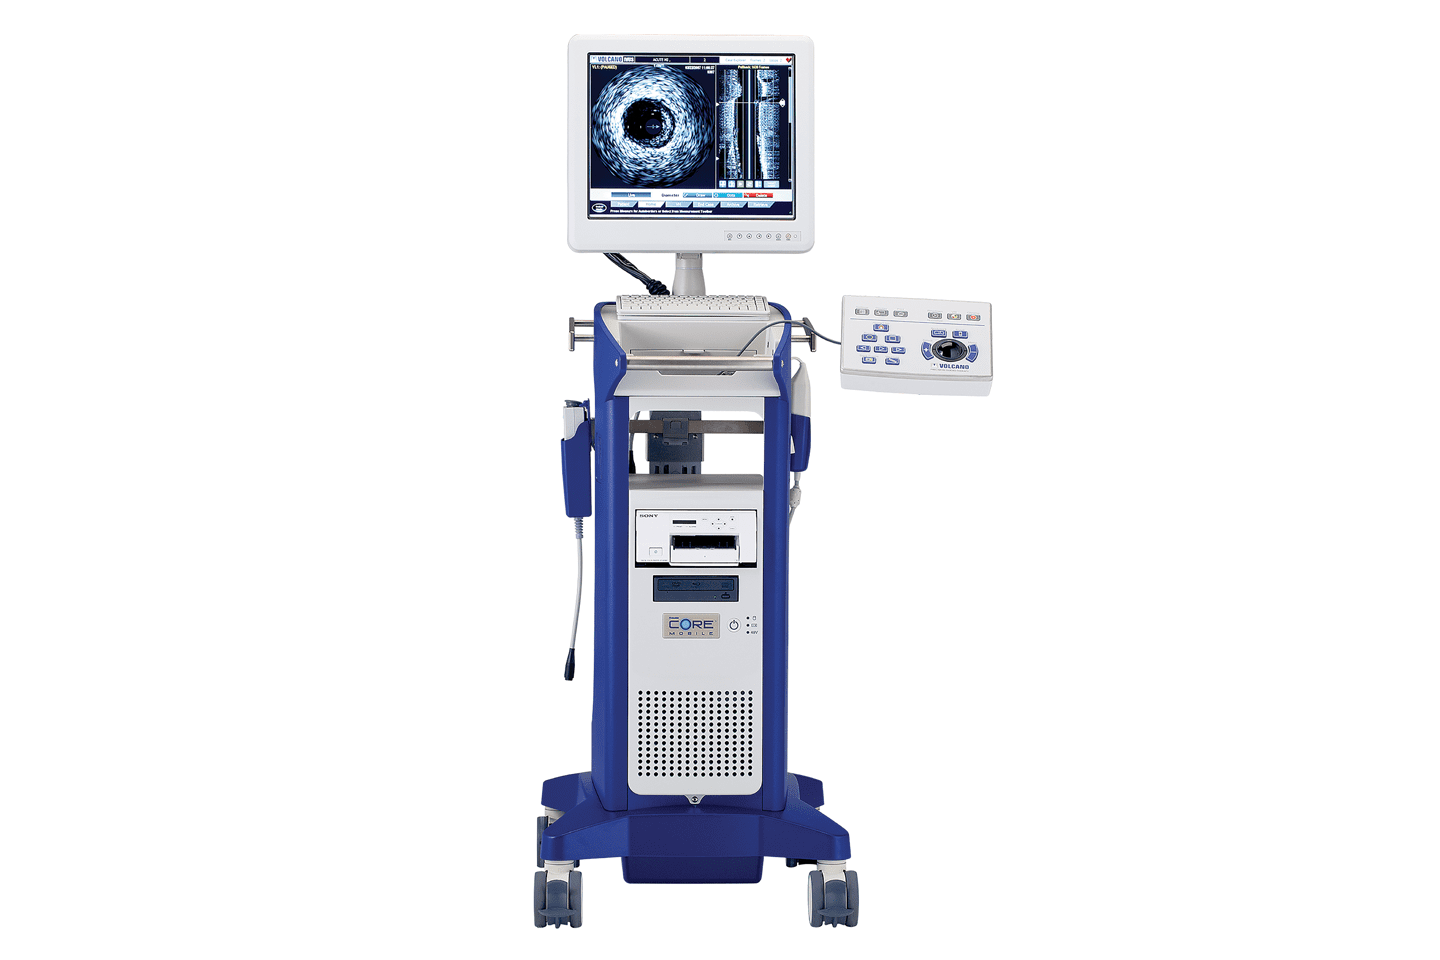 Volcano Core precision guided therapy system for performing intravascular ultrasound (IVUS) in Chattanooga